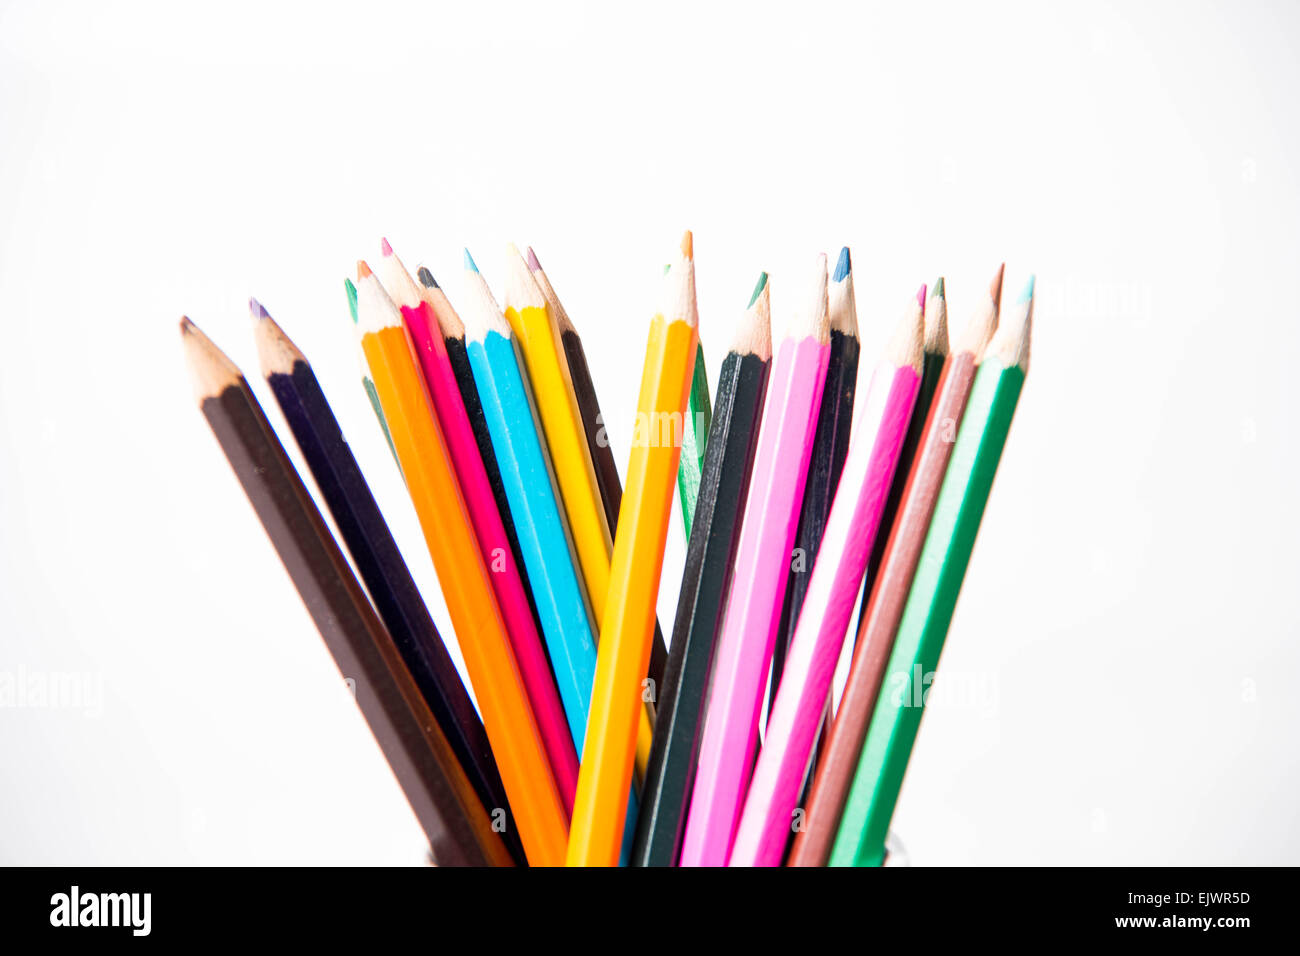 A row of childrens coloured led crayon pencils Stock Photo - Alamy